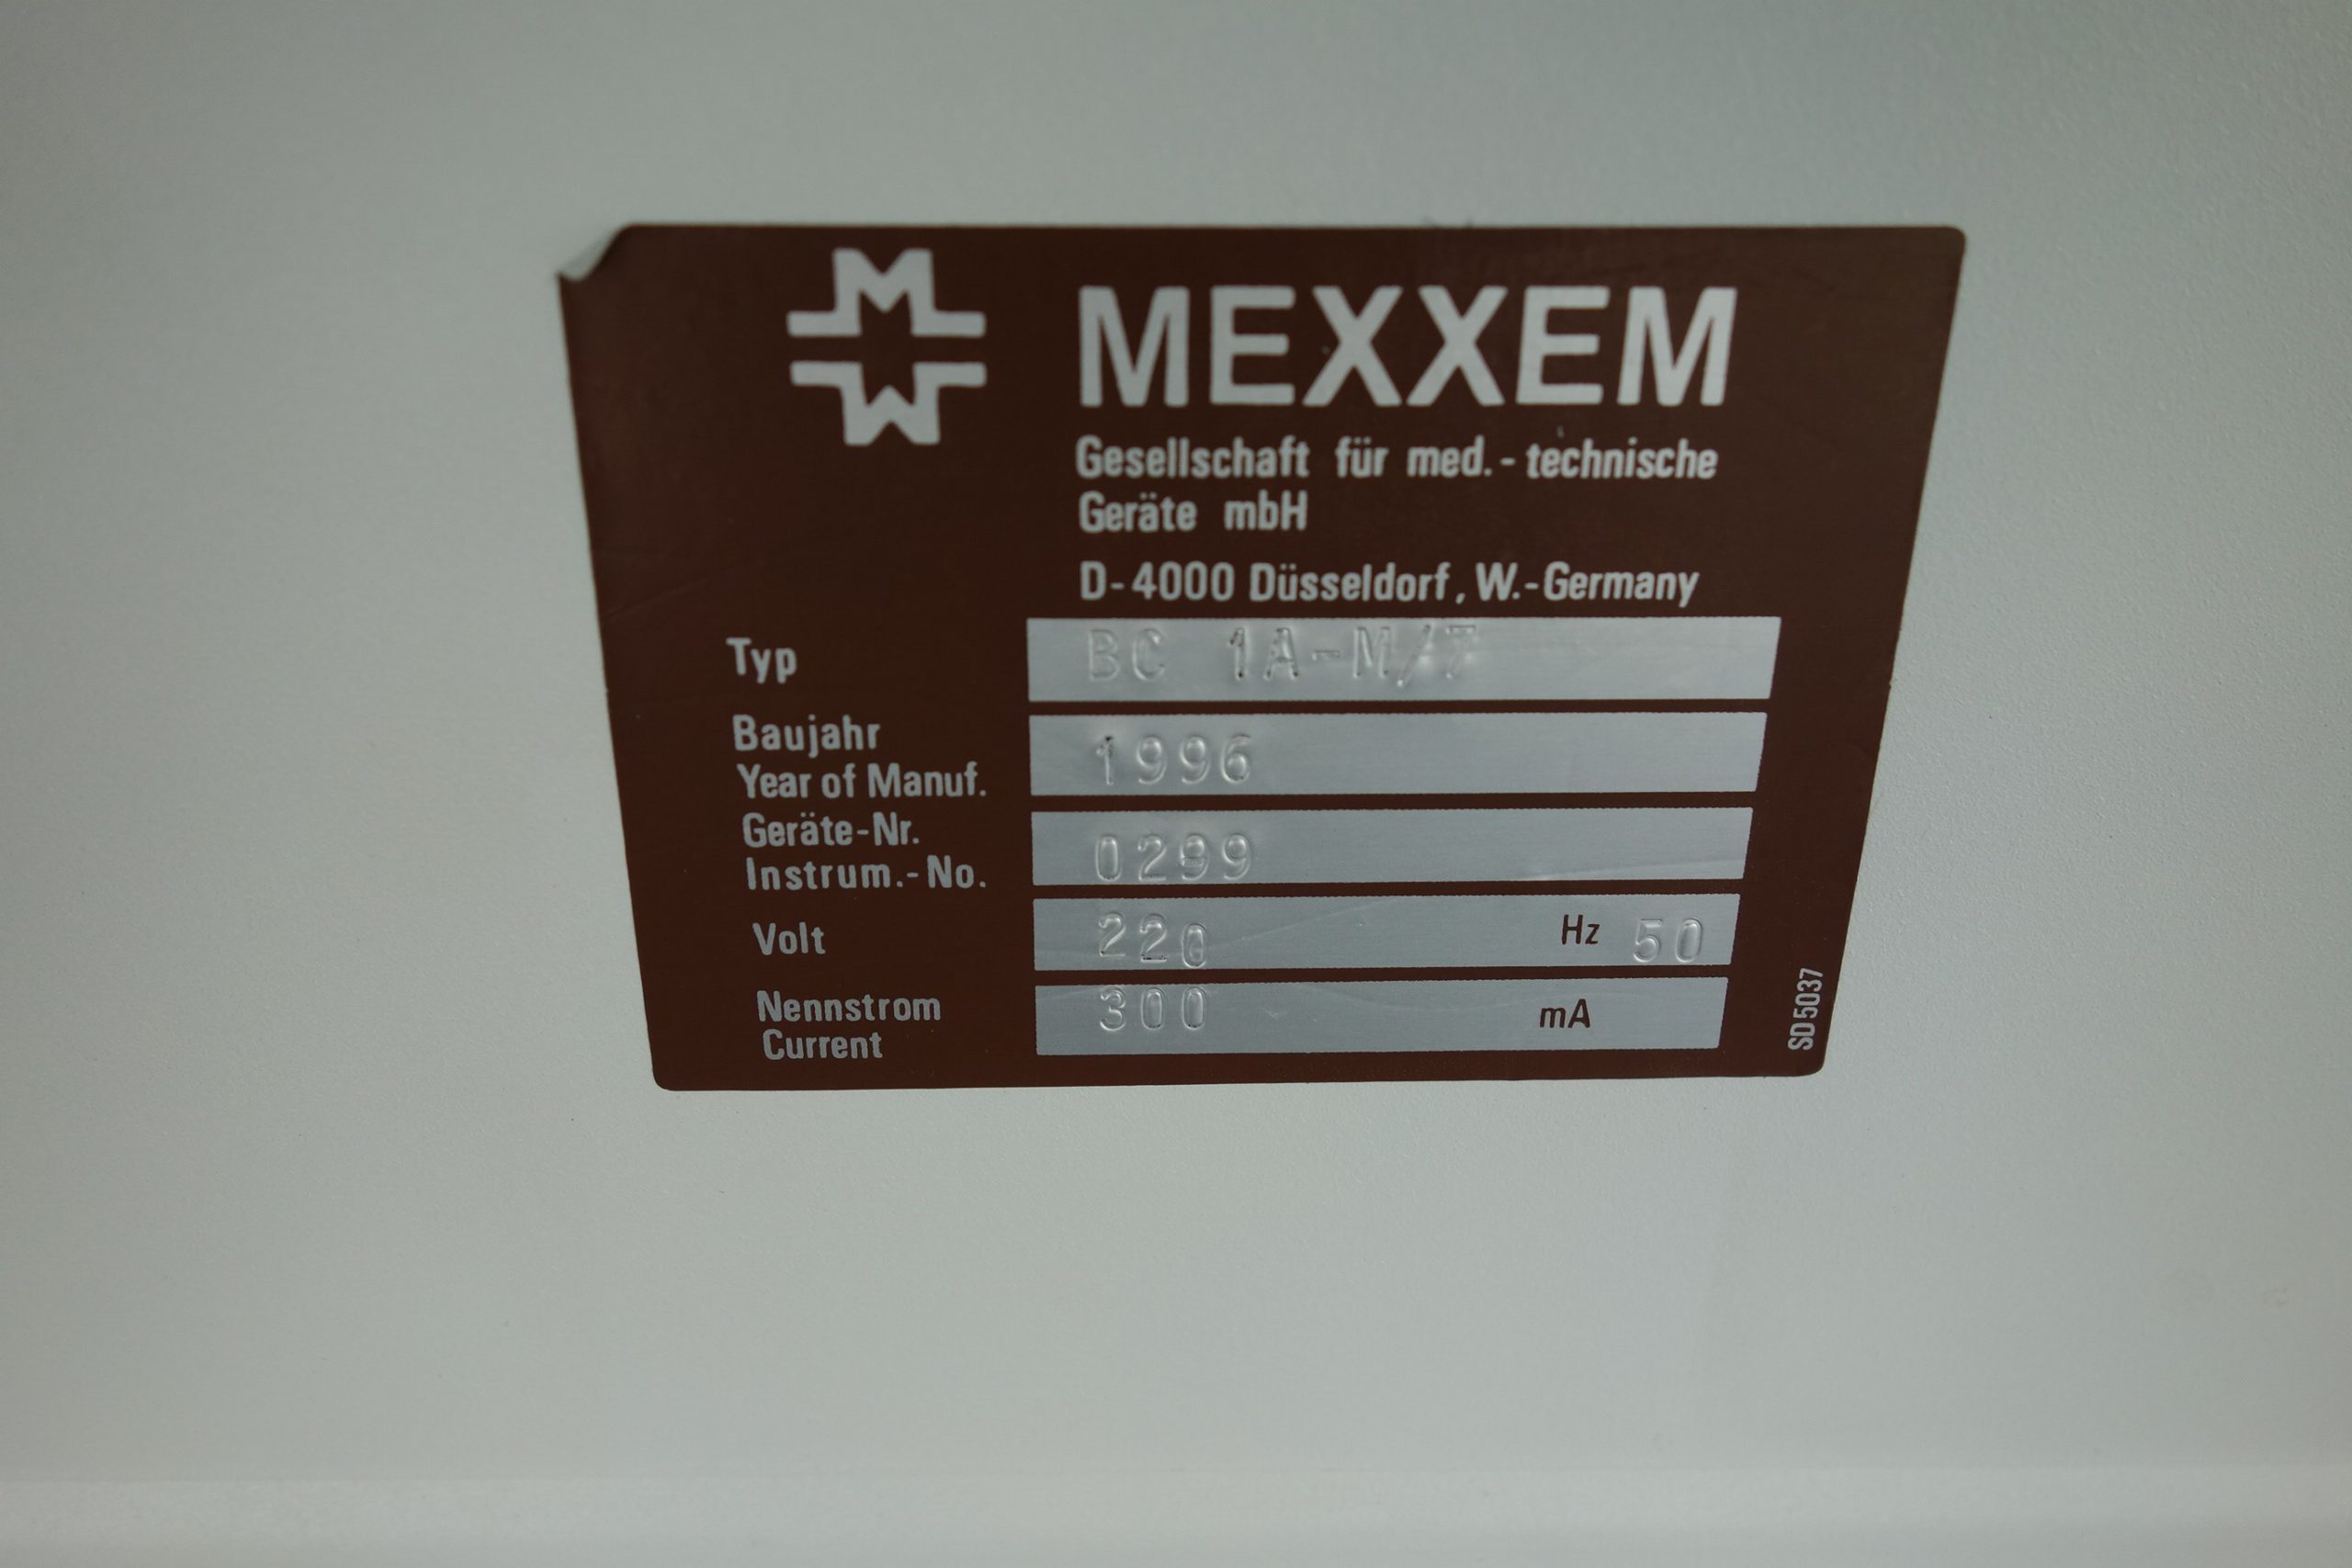 mexxem-hematology-systems-bc-1a-multi-7-mit-diluter-power-print-unit-4612